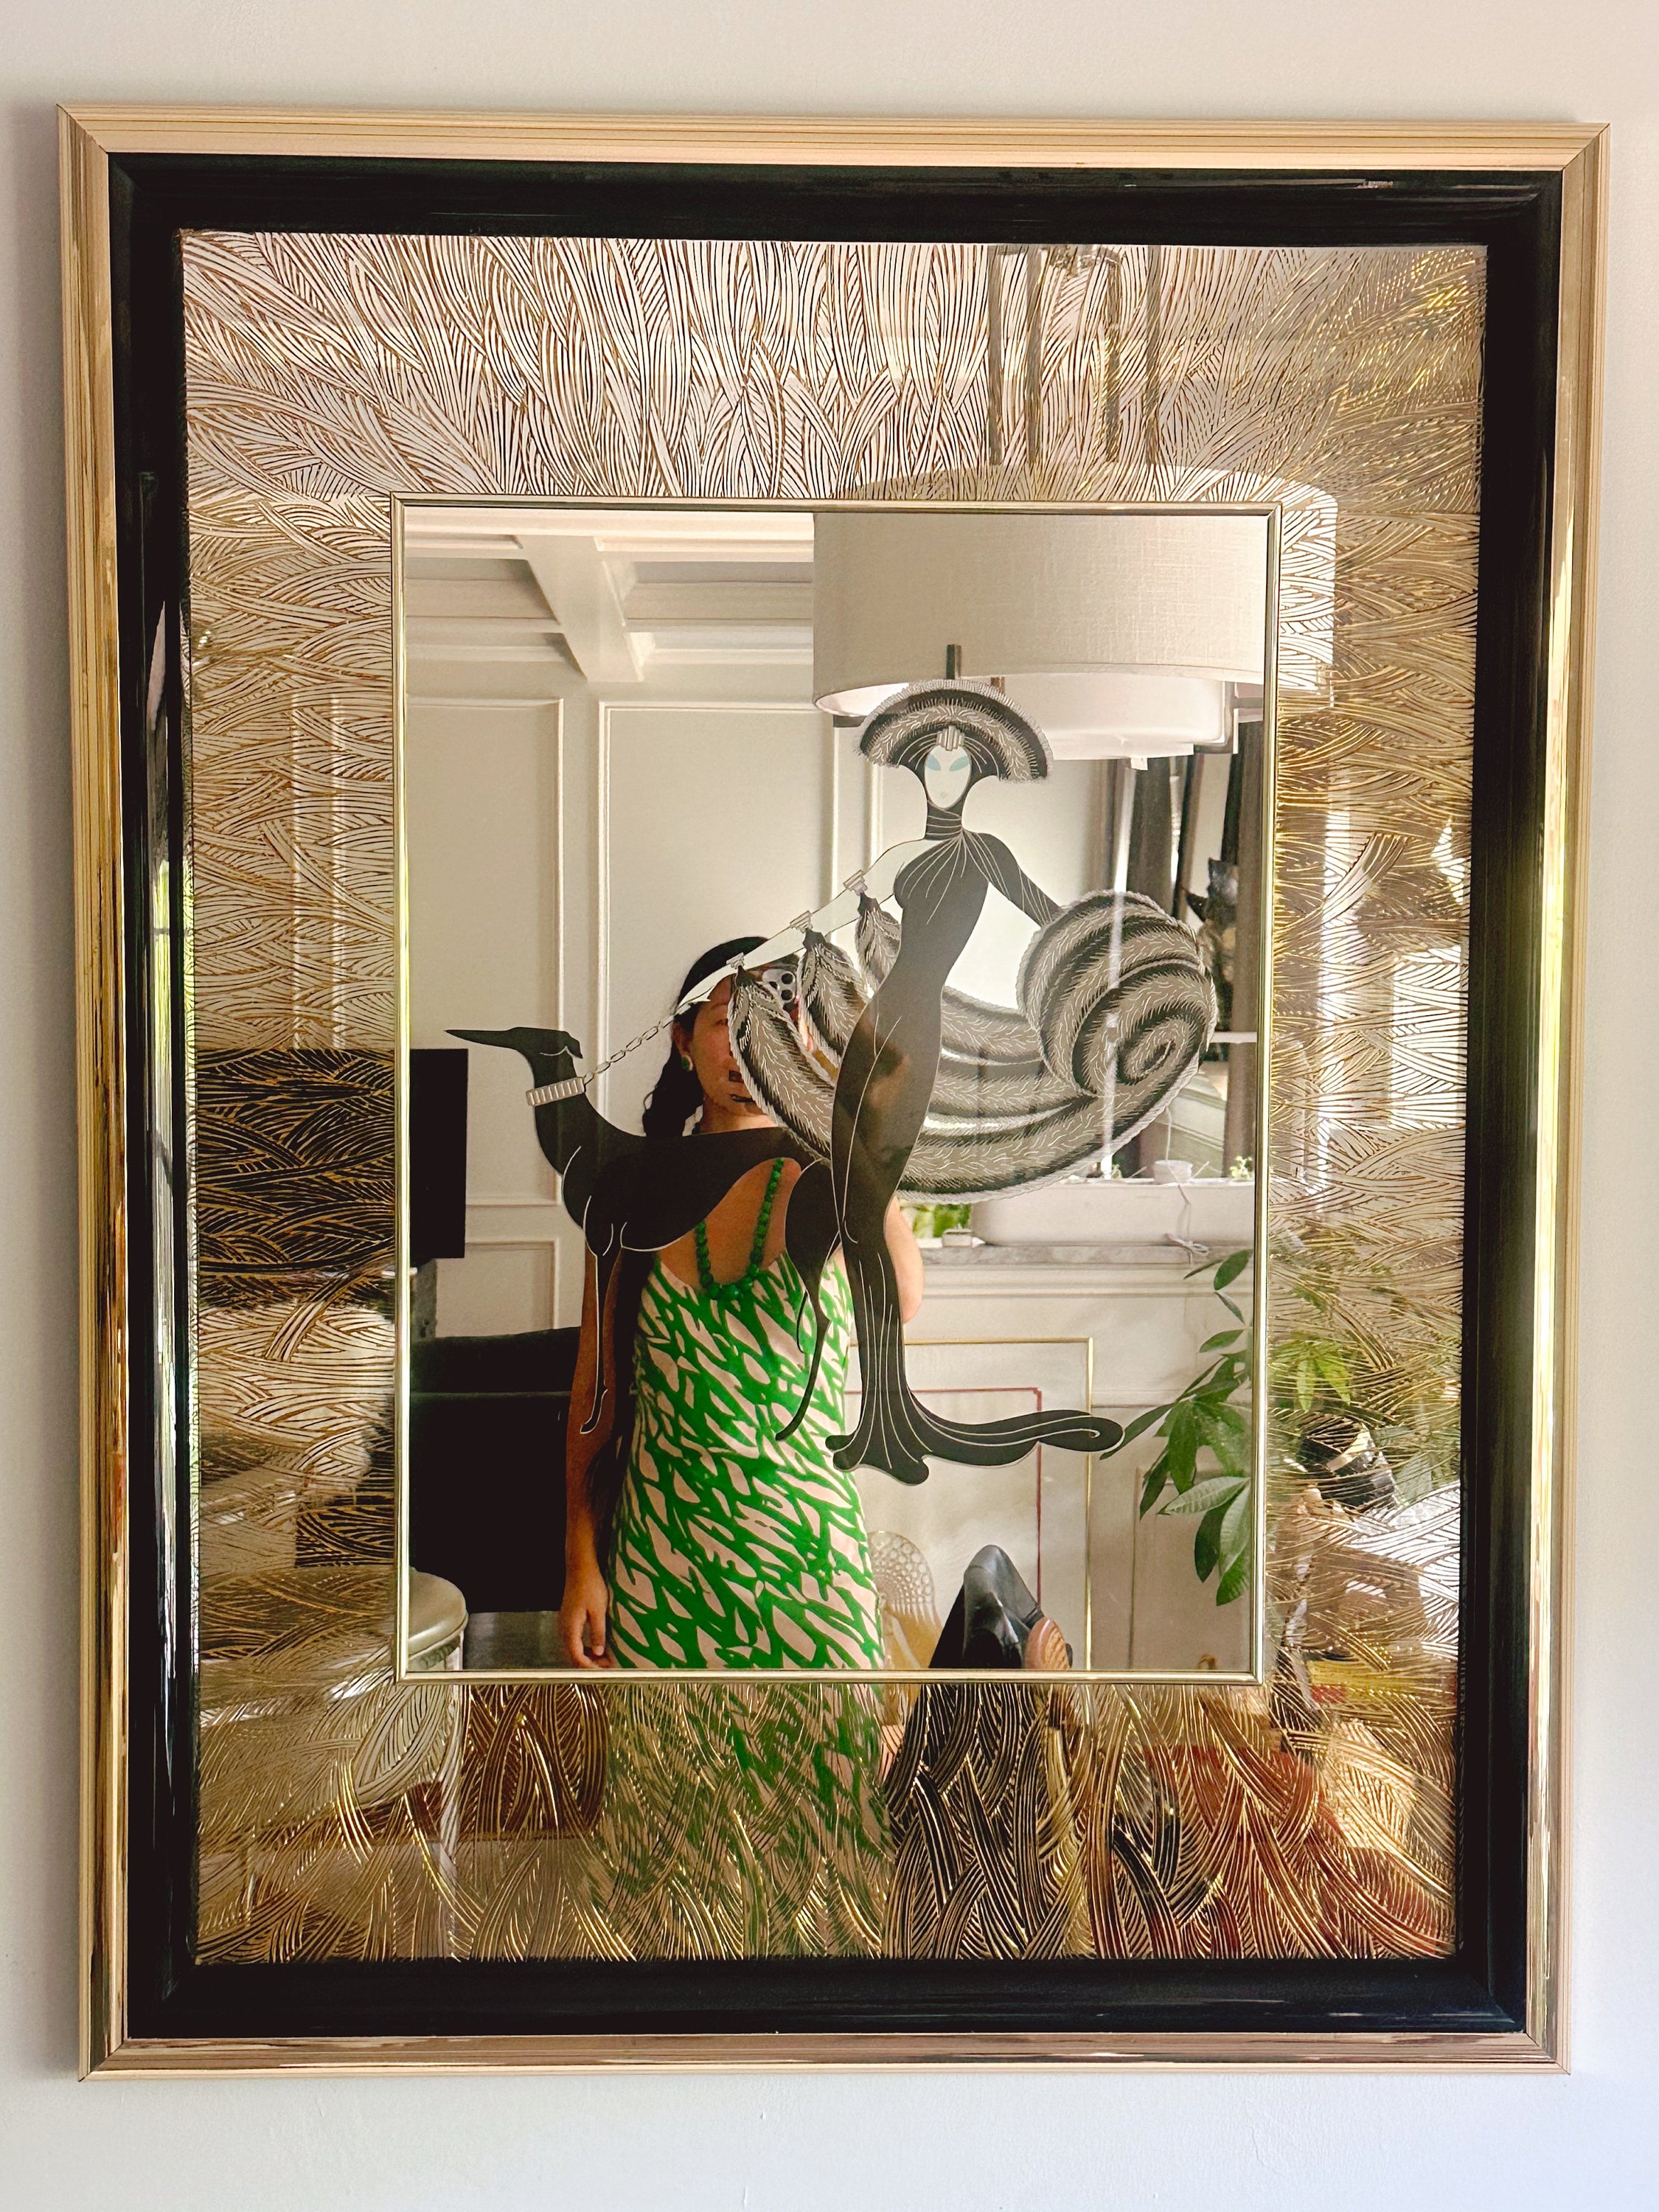 Stunning Vintage 1980s Erte "Symphony in Black" Art Mirror in Gold Frame | Large Art Deco Style Wall Mirror | Collectible Glass Art